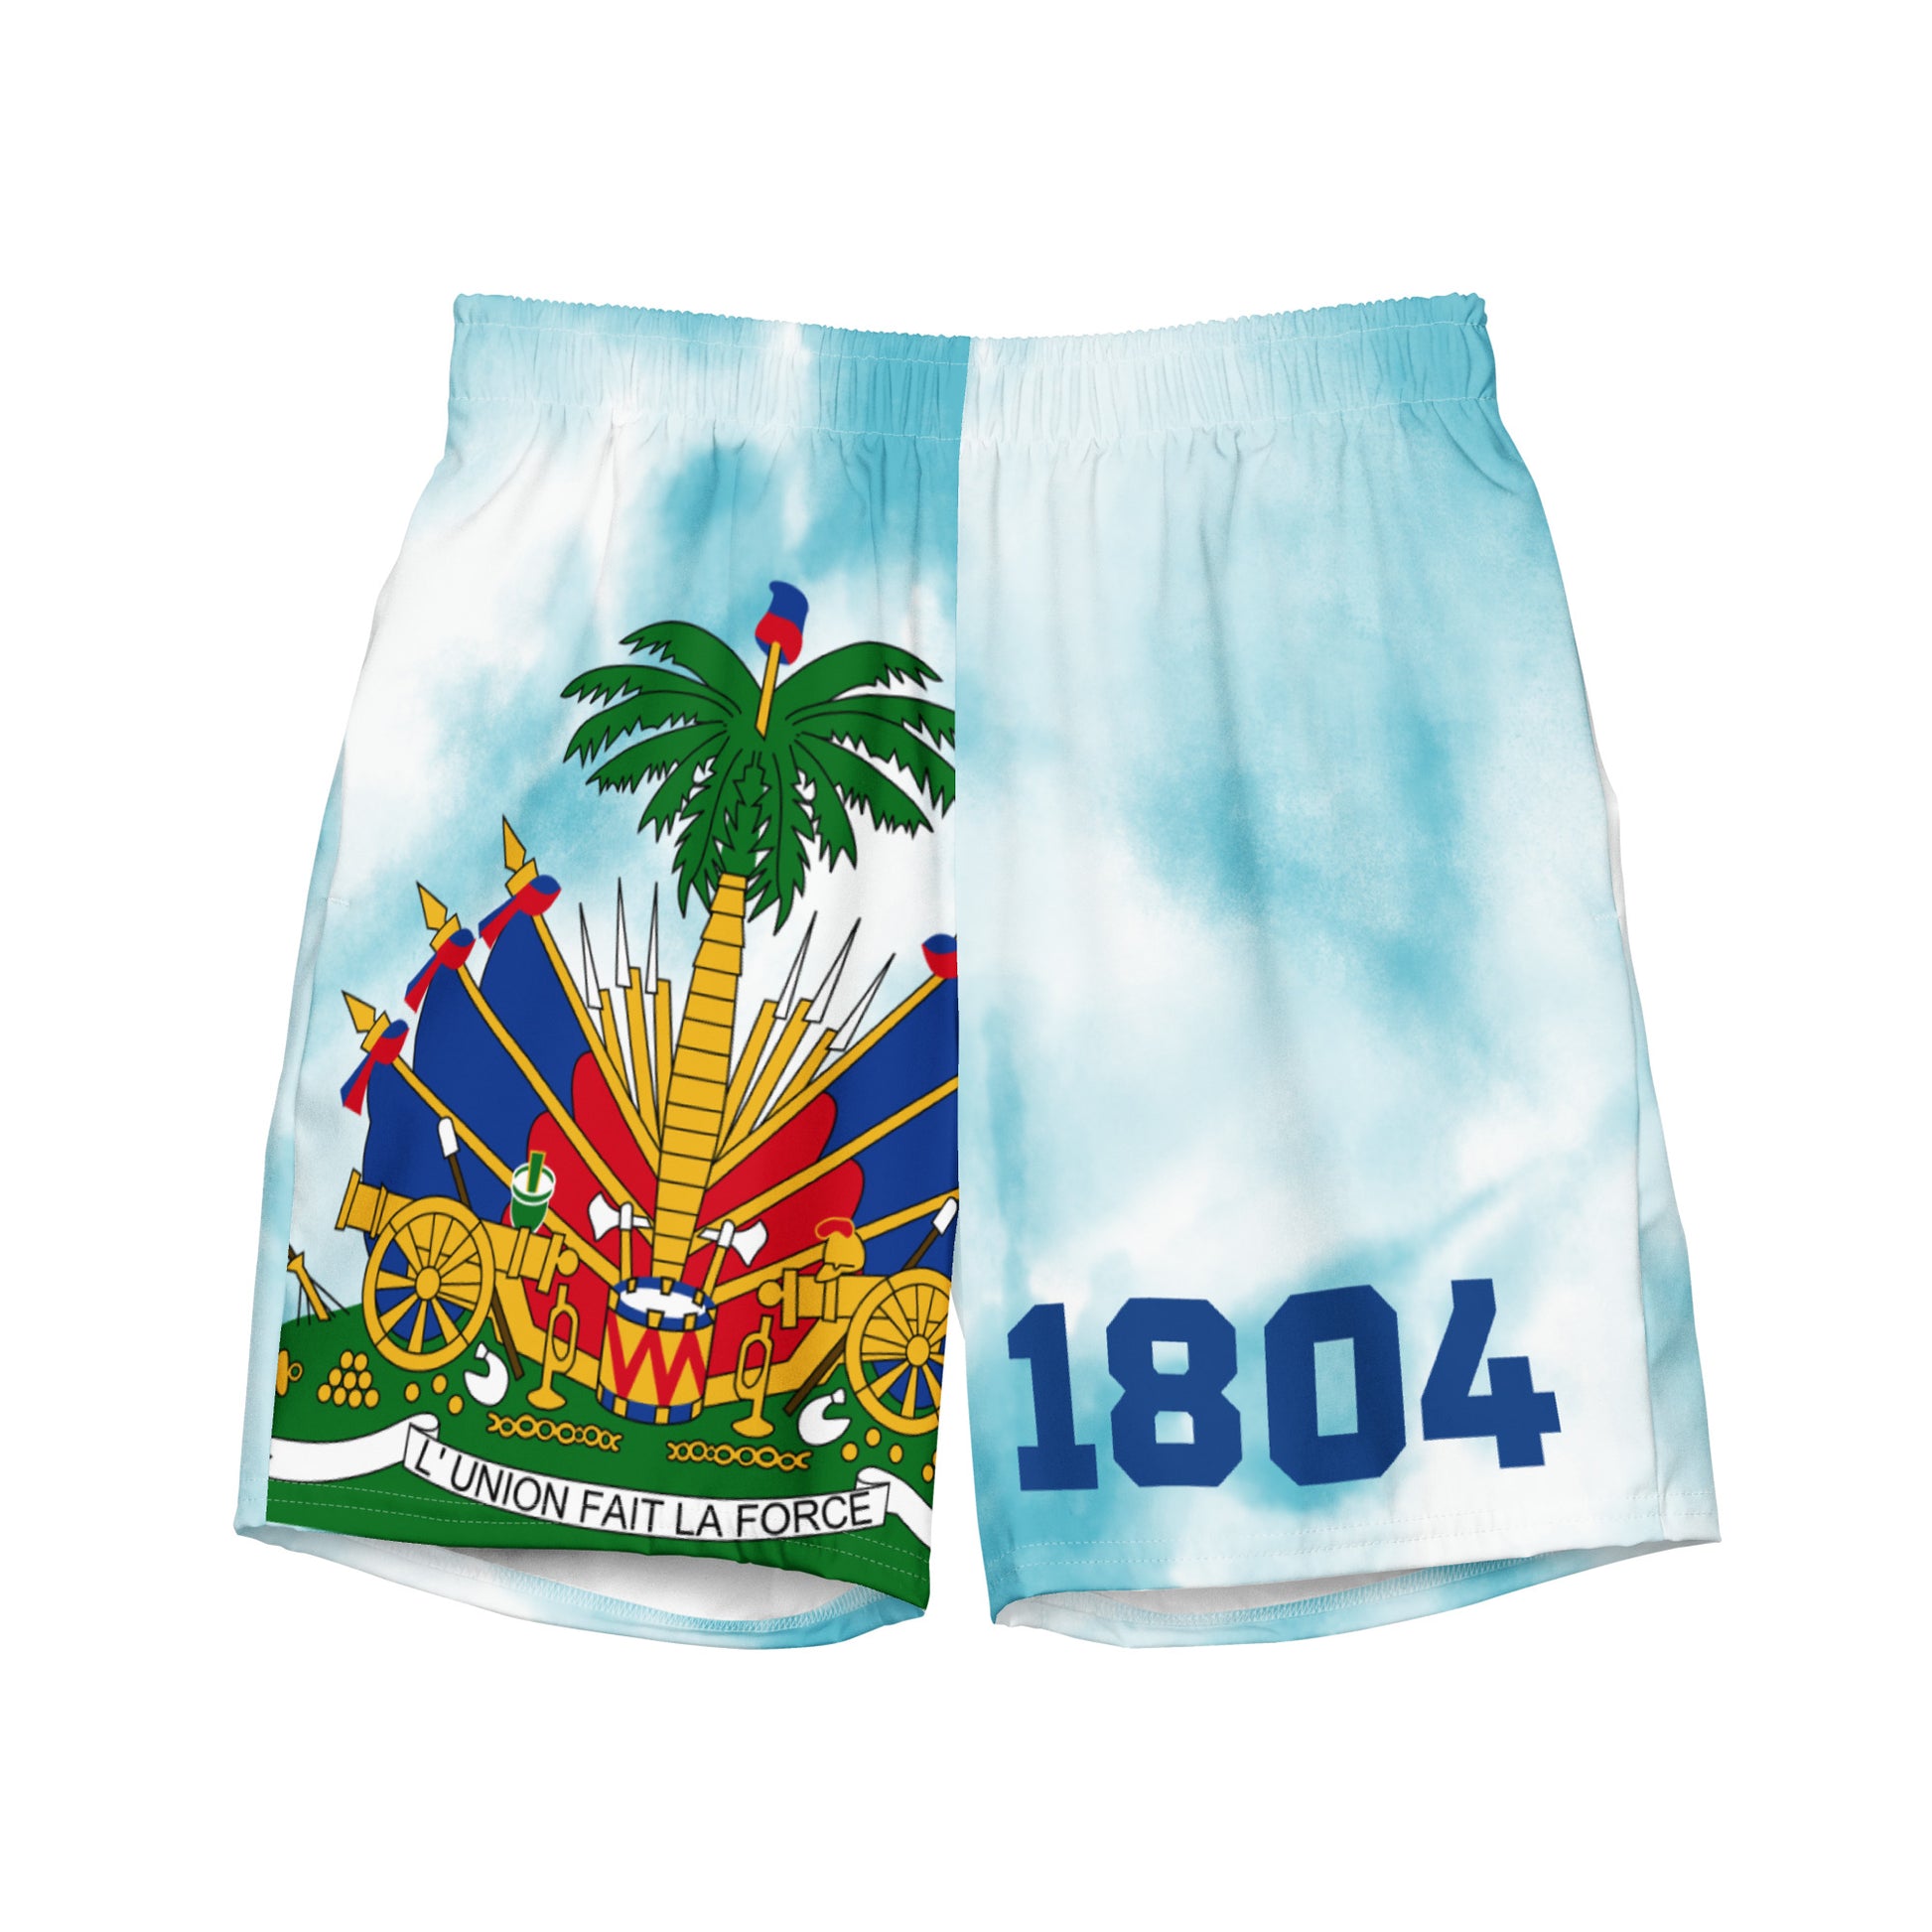 Men's swim trunks-summer activities-Haitian emblem-stay cool-théo gallery expo-théo photography